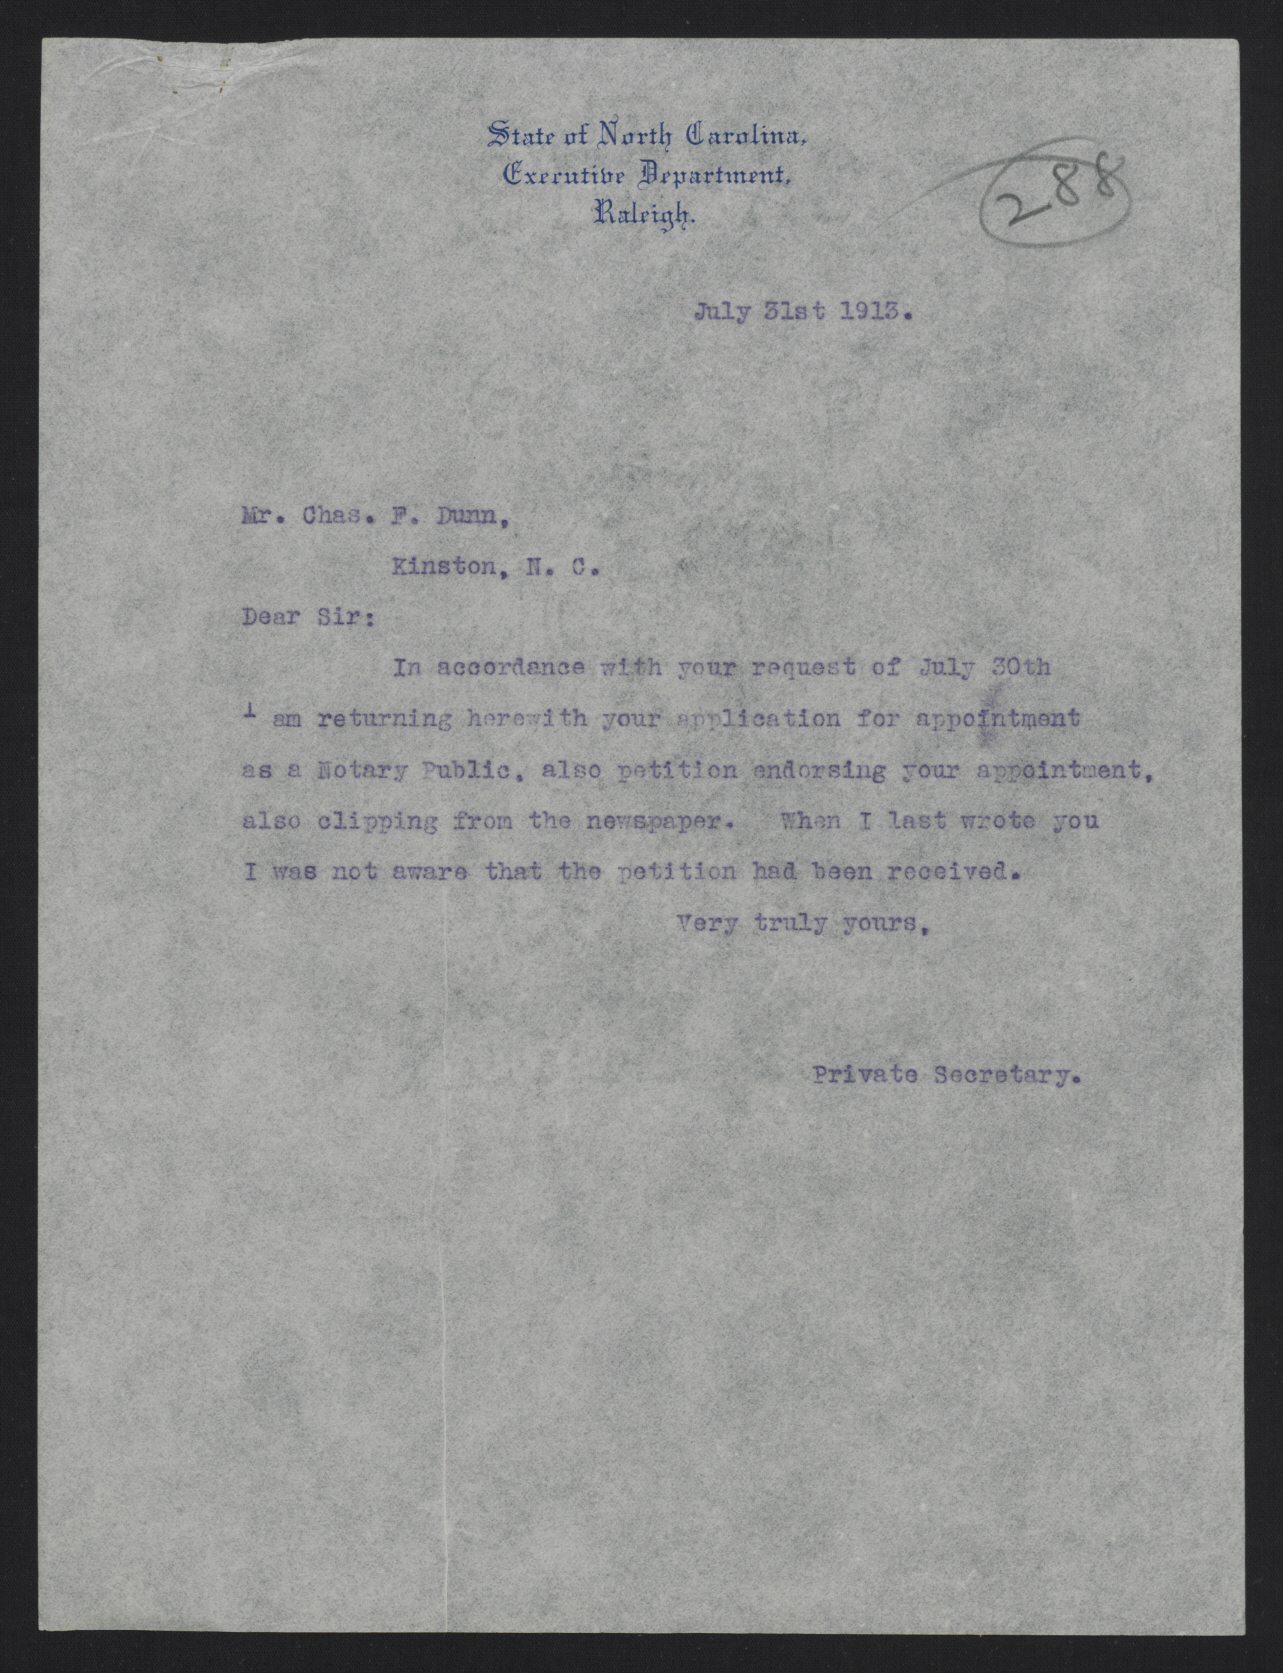 Letter from Kerr to Dunn, July 31, 1913